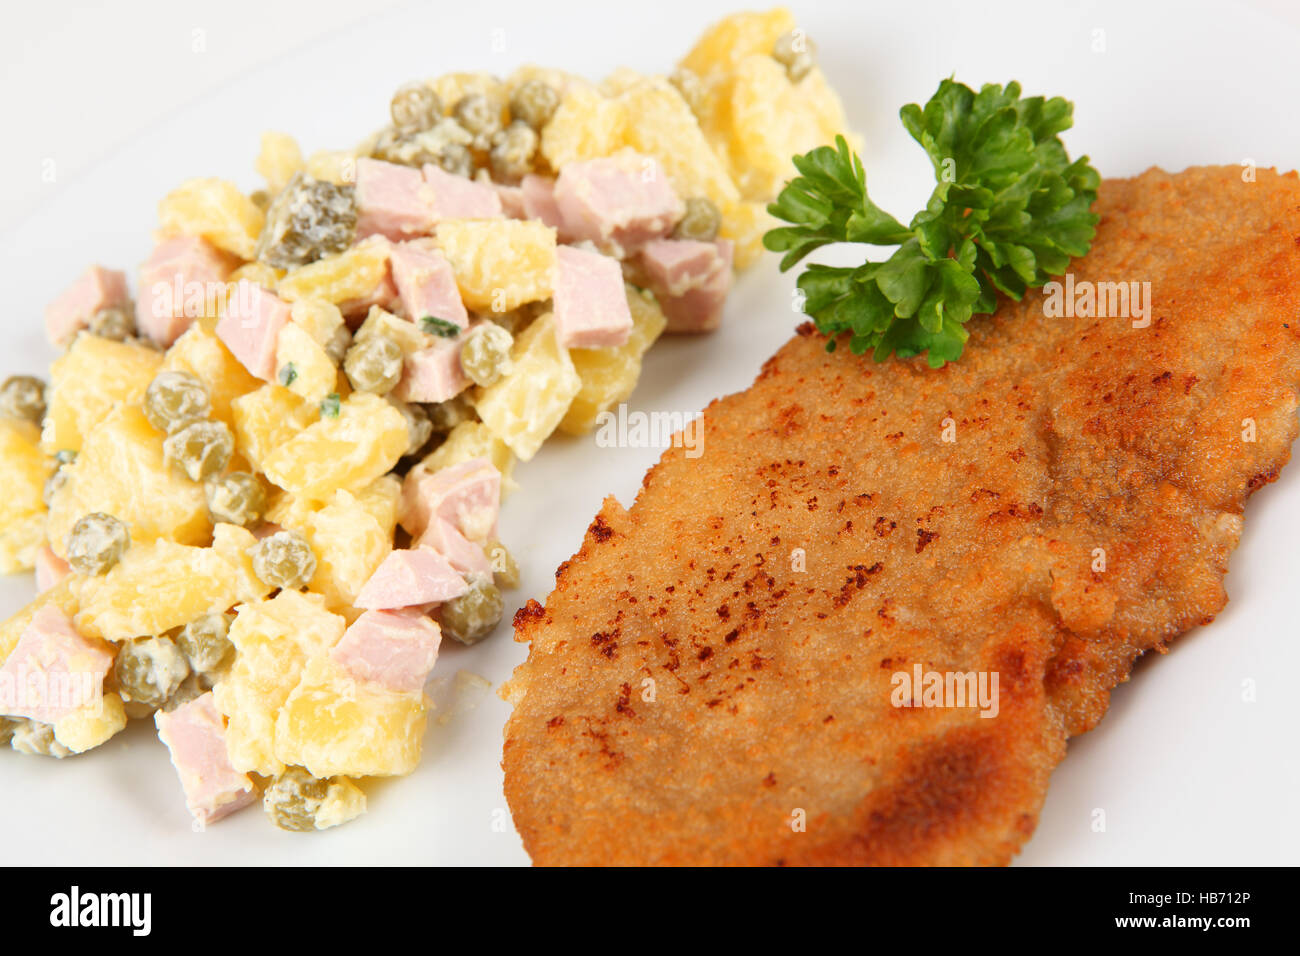 cutlet and salad Stock Photo